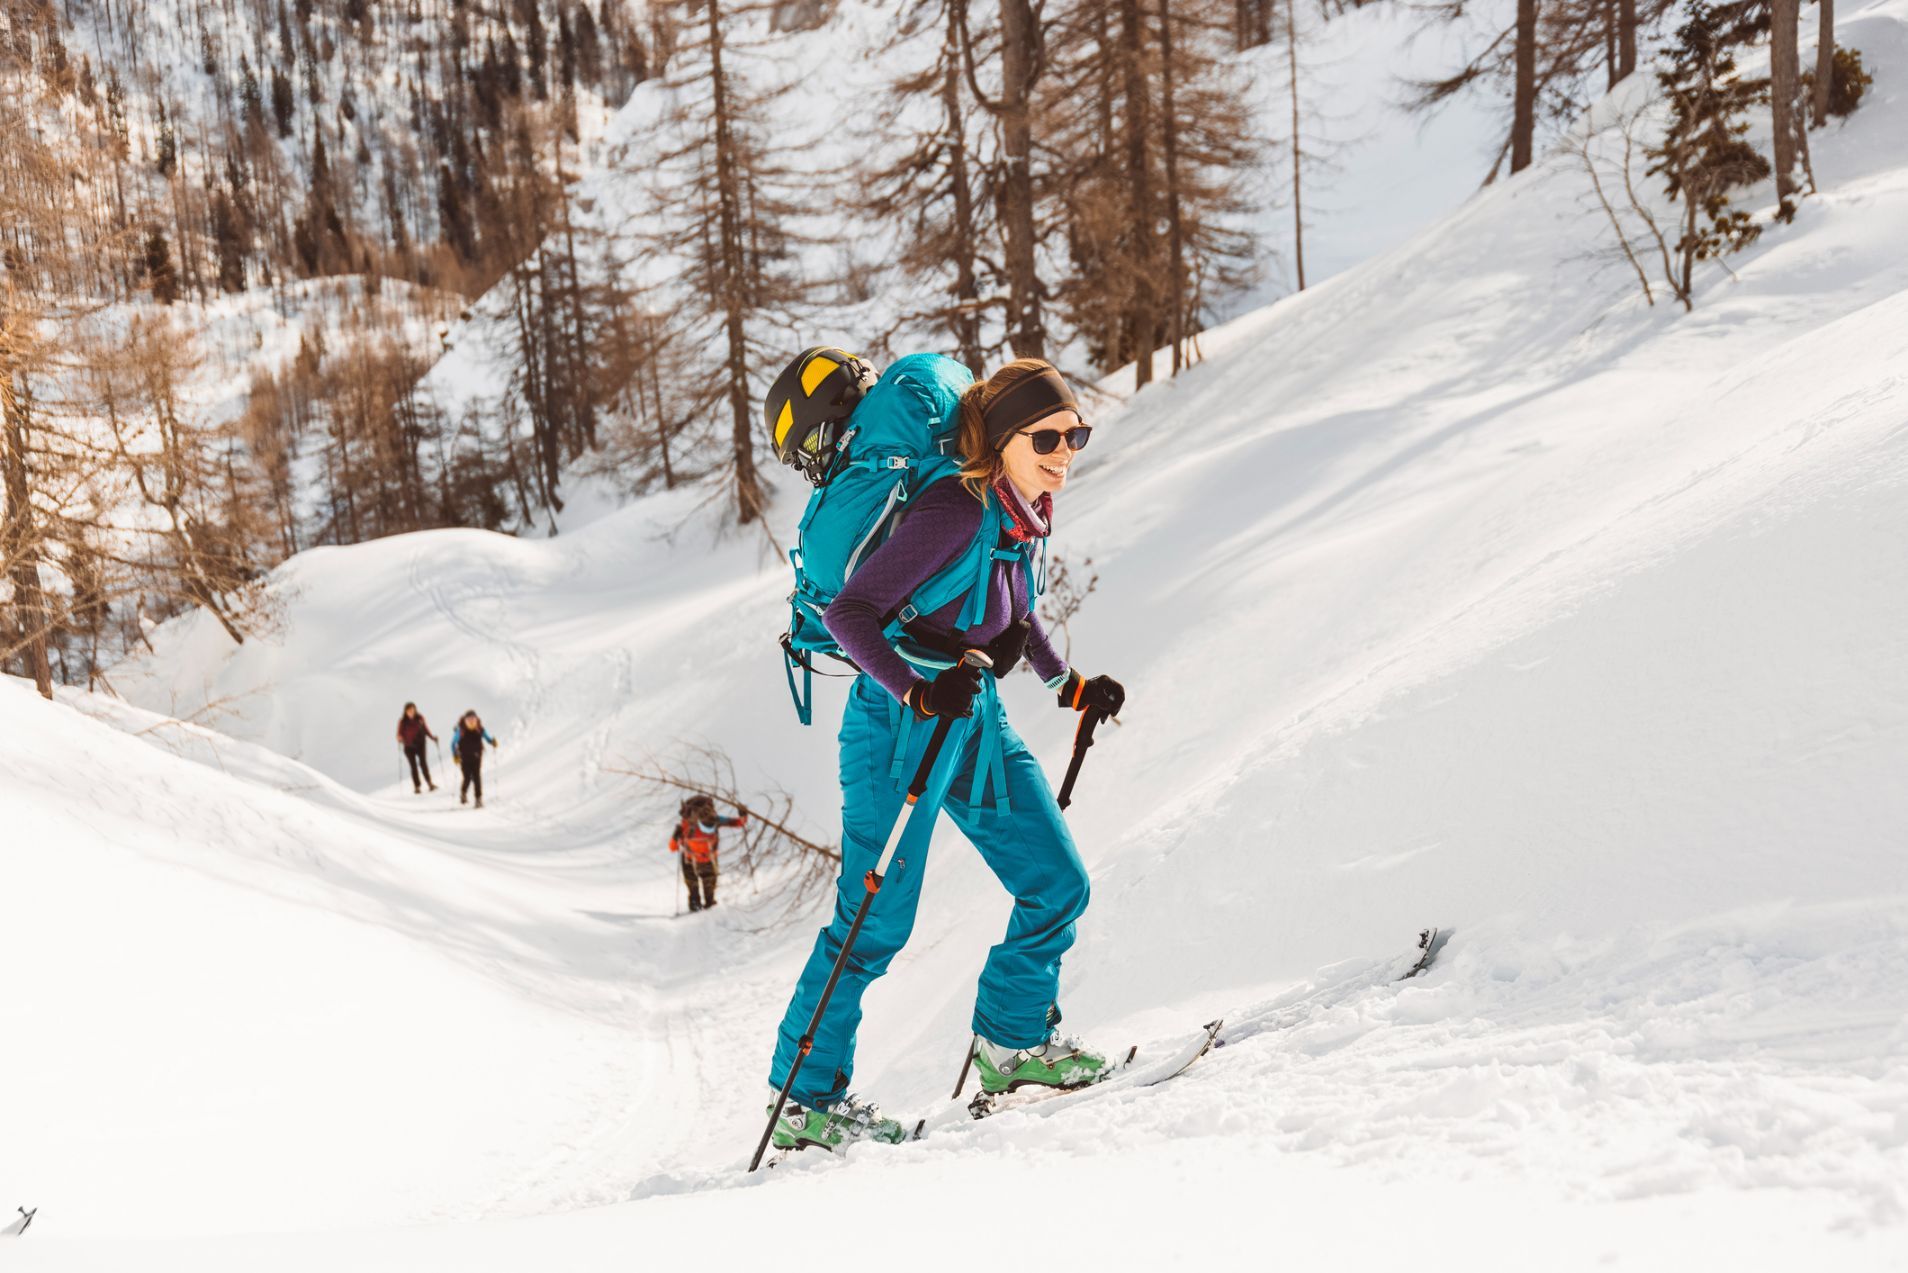 A ski tourer poses with her kit on her back - the rest of the group are behind her